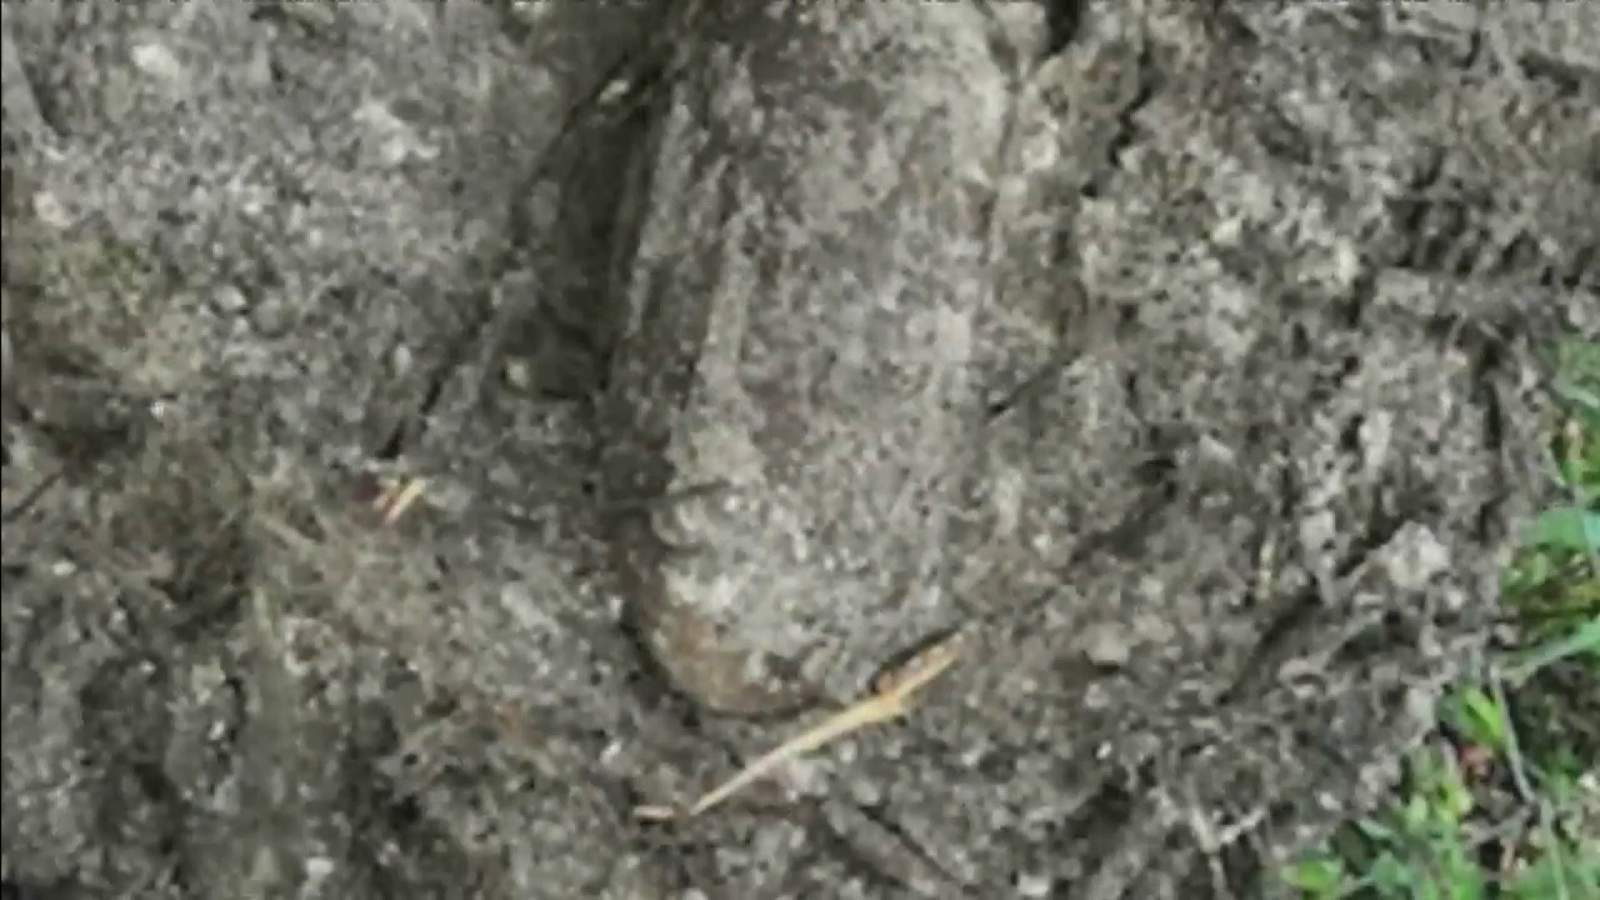 Old military device found buried in South Florida backyard